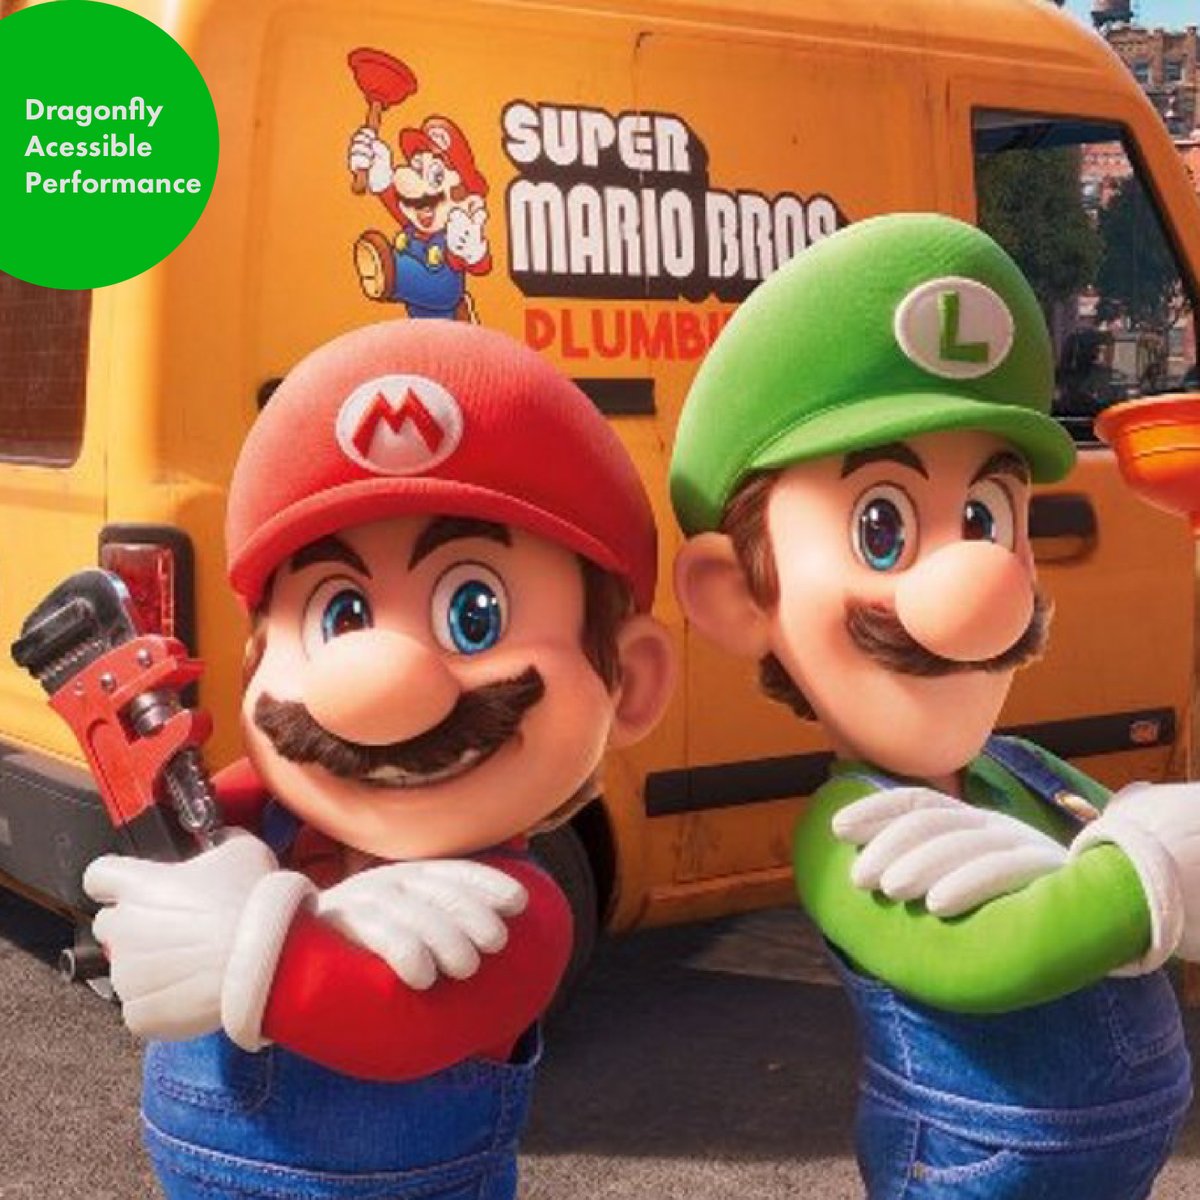 Get your tickets for tomorrow mornings screening of The Super Mario Bros. Movie!🍄 🗓️Friday 8th September, 11:00 AM 🎟️General £5.00, Carers Go Free This is a Dragonfly Accessible Screening. Tickets: bit.ly/DAPTSMBM